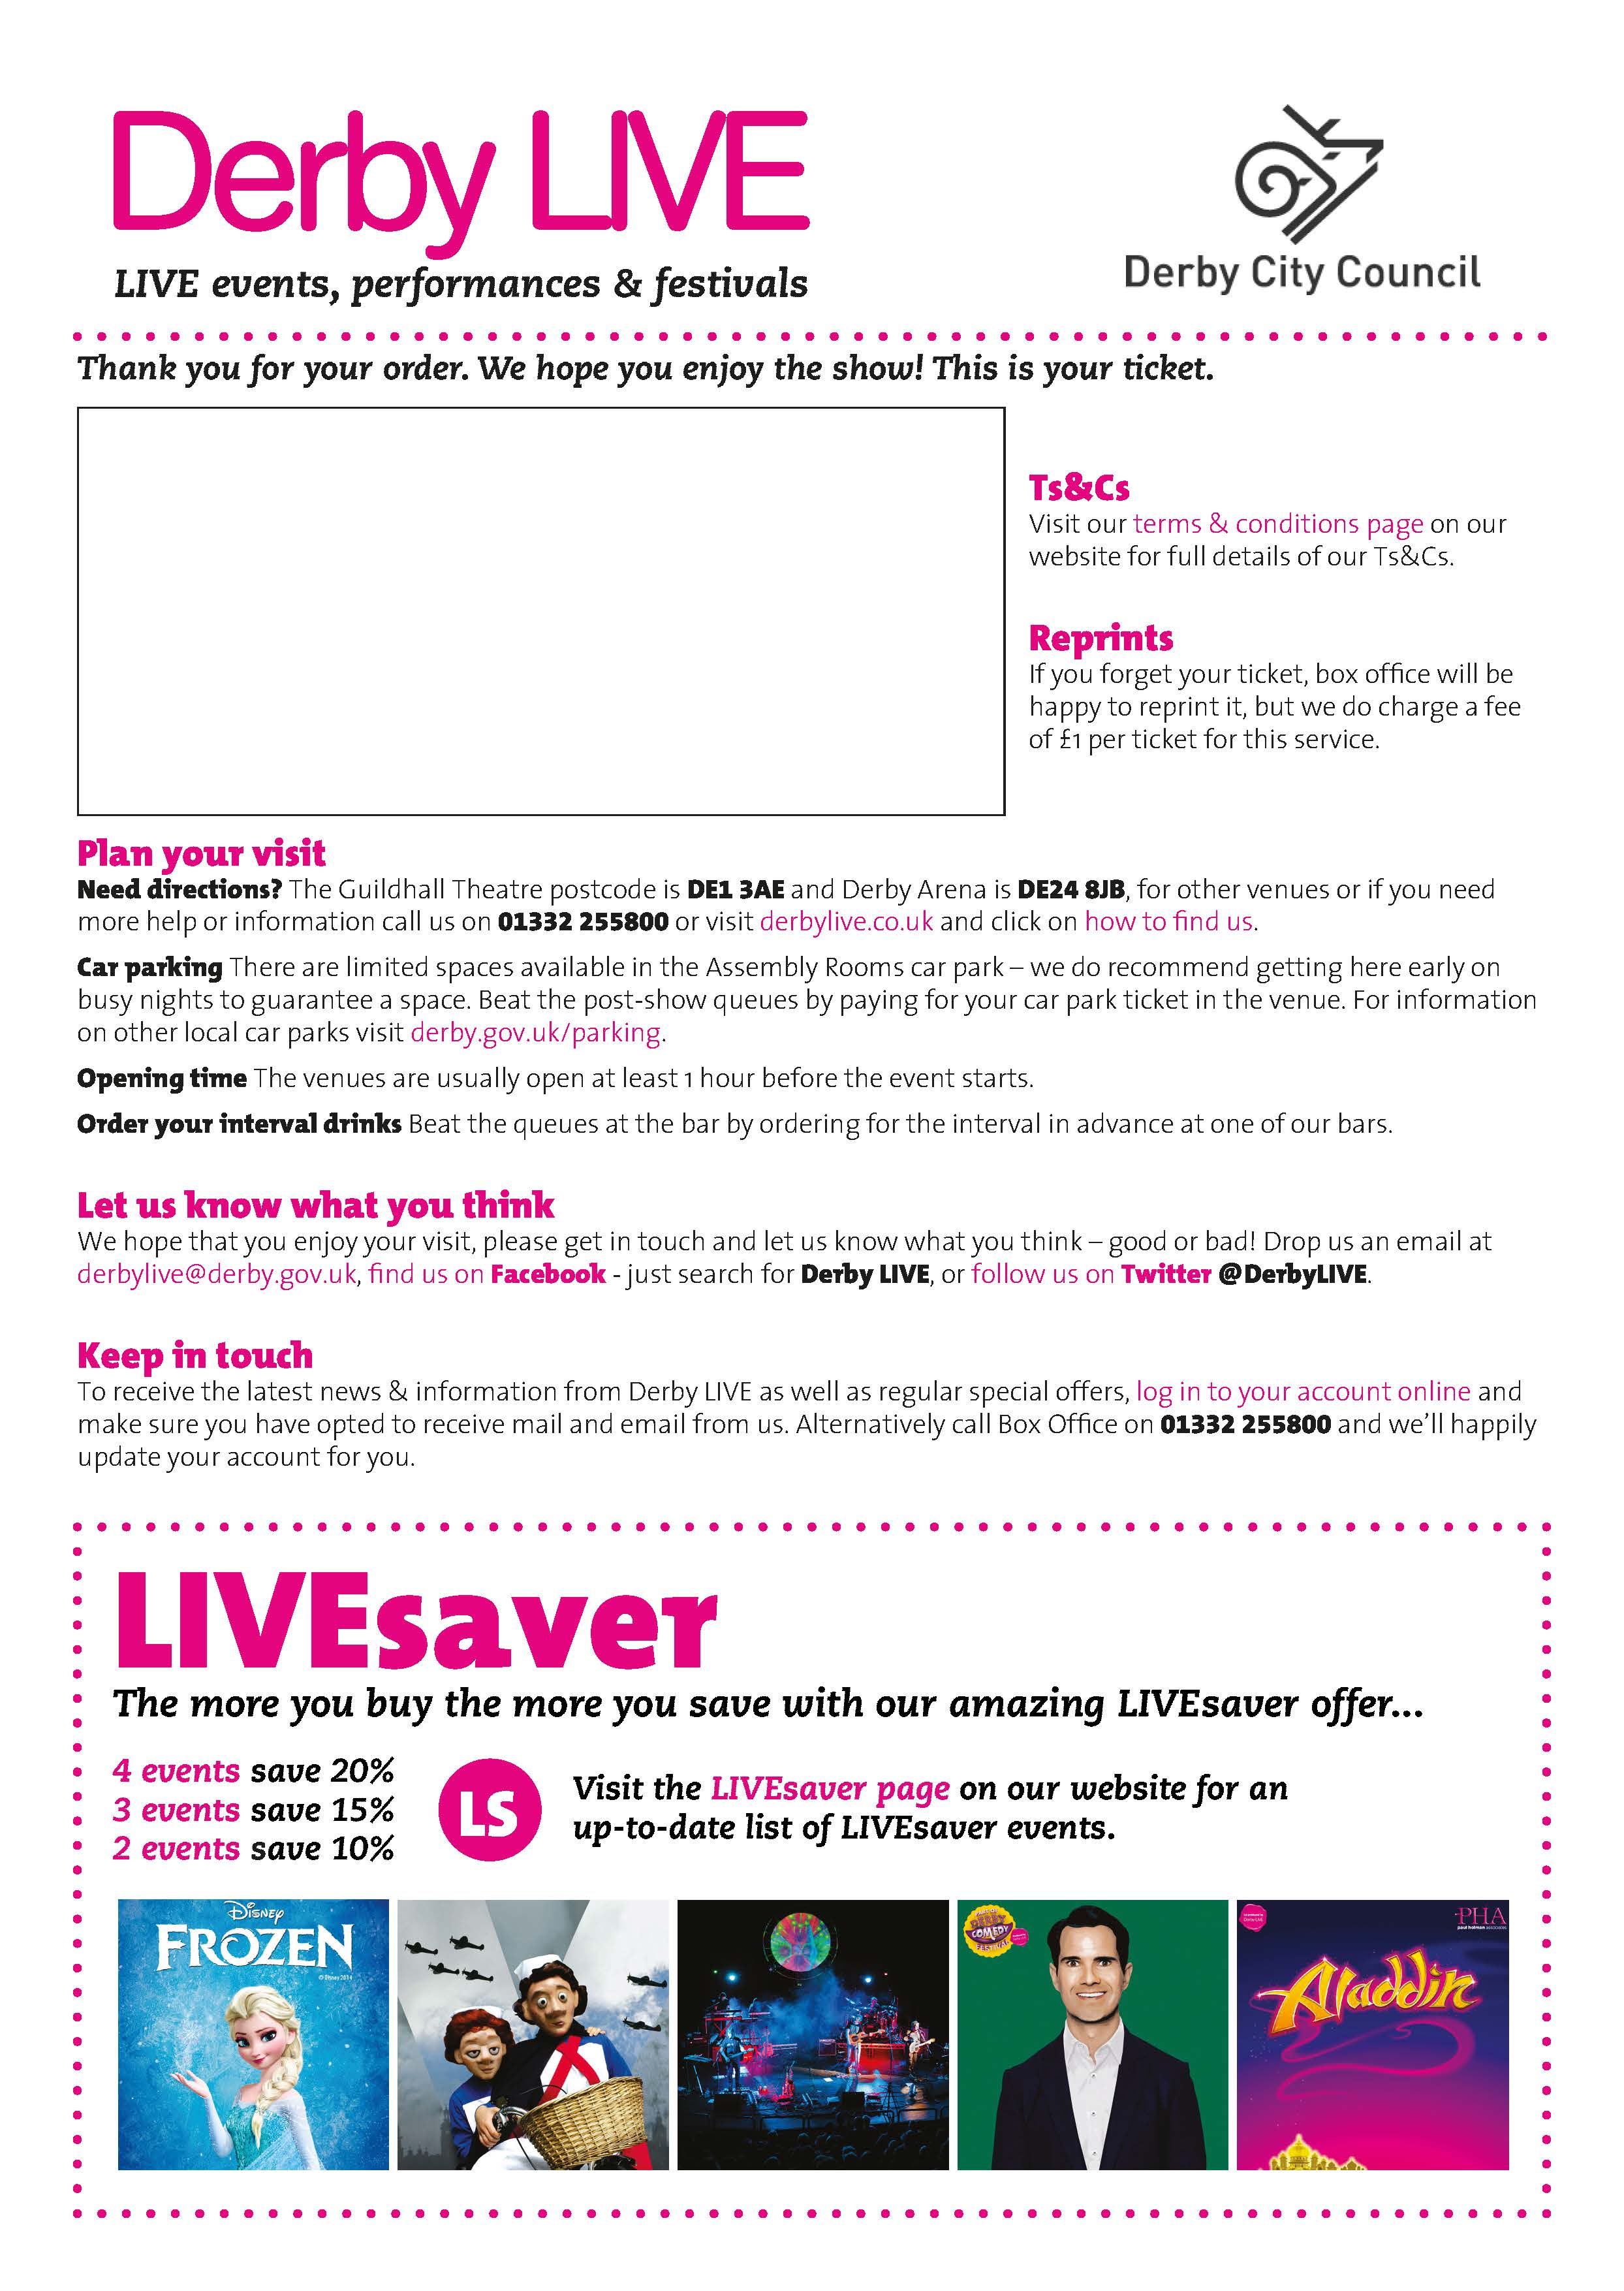 A bright ticket from Derby Live, packed with travel and ticketing information, inviting feedback and promoting multibuy savings